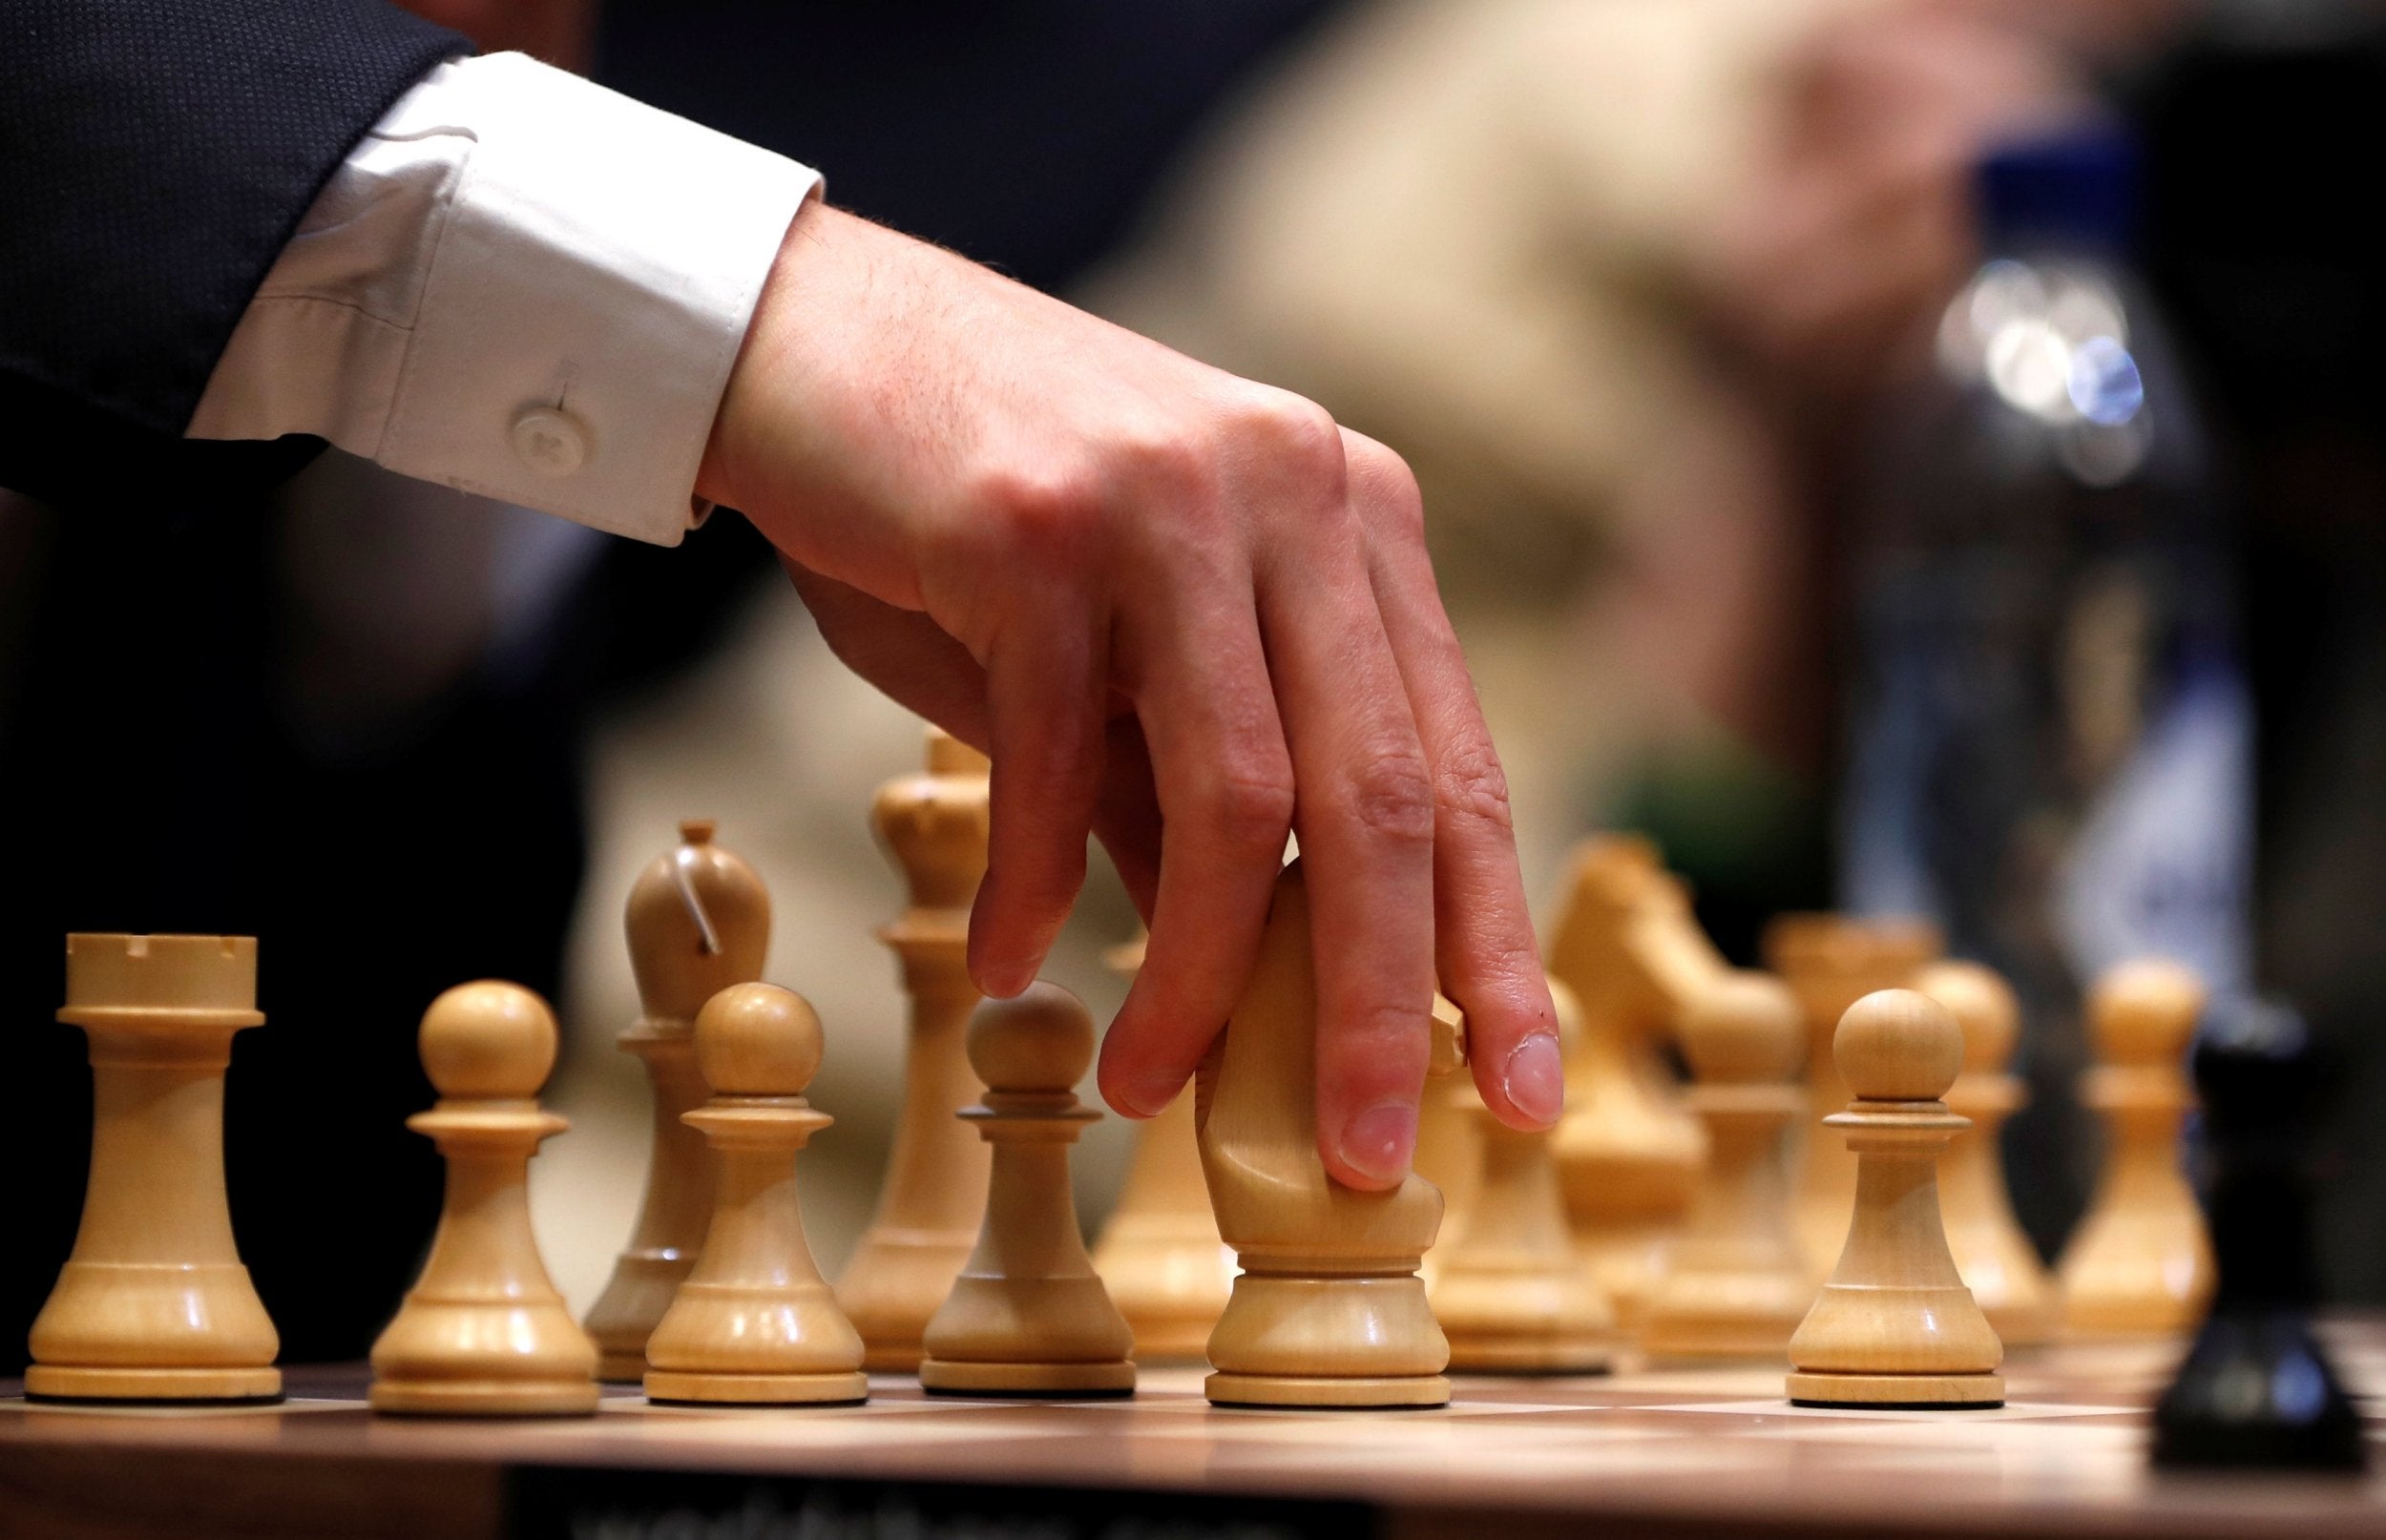 Saudi Arabia loses right to host international chess tournament after